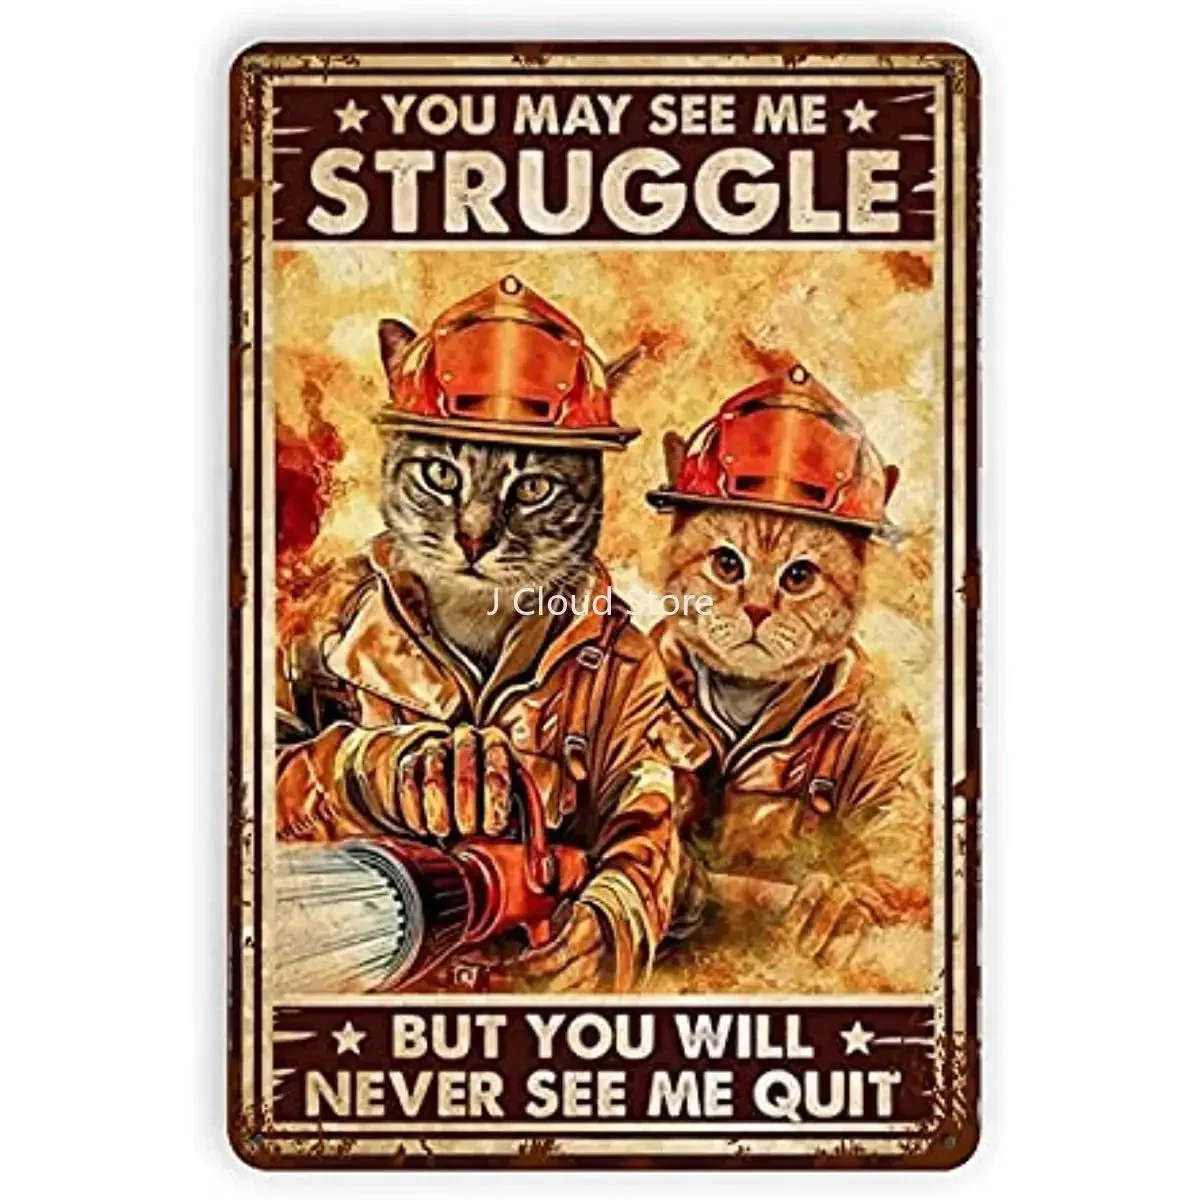 Tin Sign Vintage Cat Firefighter Poster Garden Bathroom Bedroom Club Wall Decoration Birthday Gift 12x18 Inches 1914 join an american legion post vintage look reproduction metal tin sign 12x18 inches